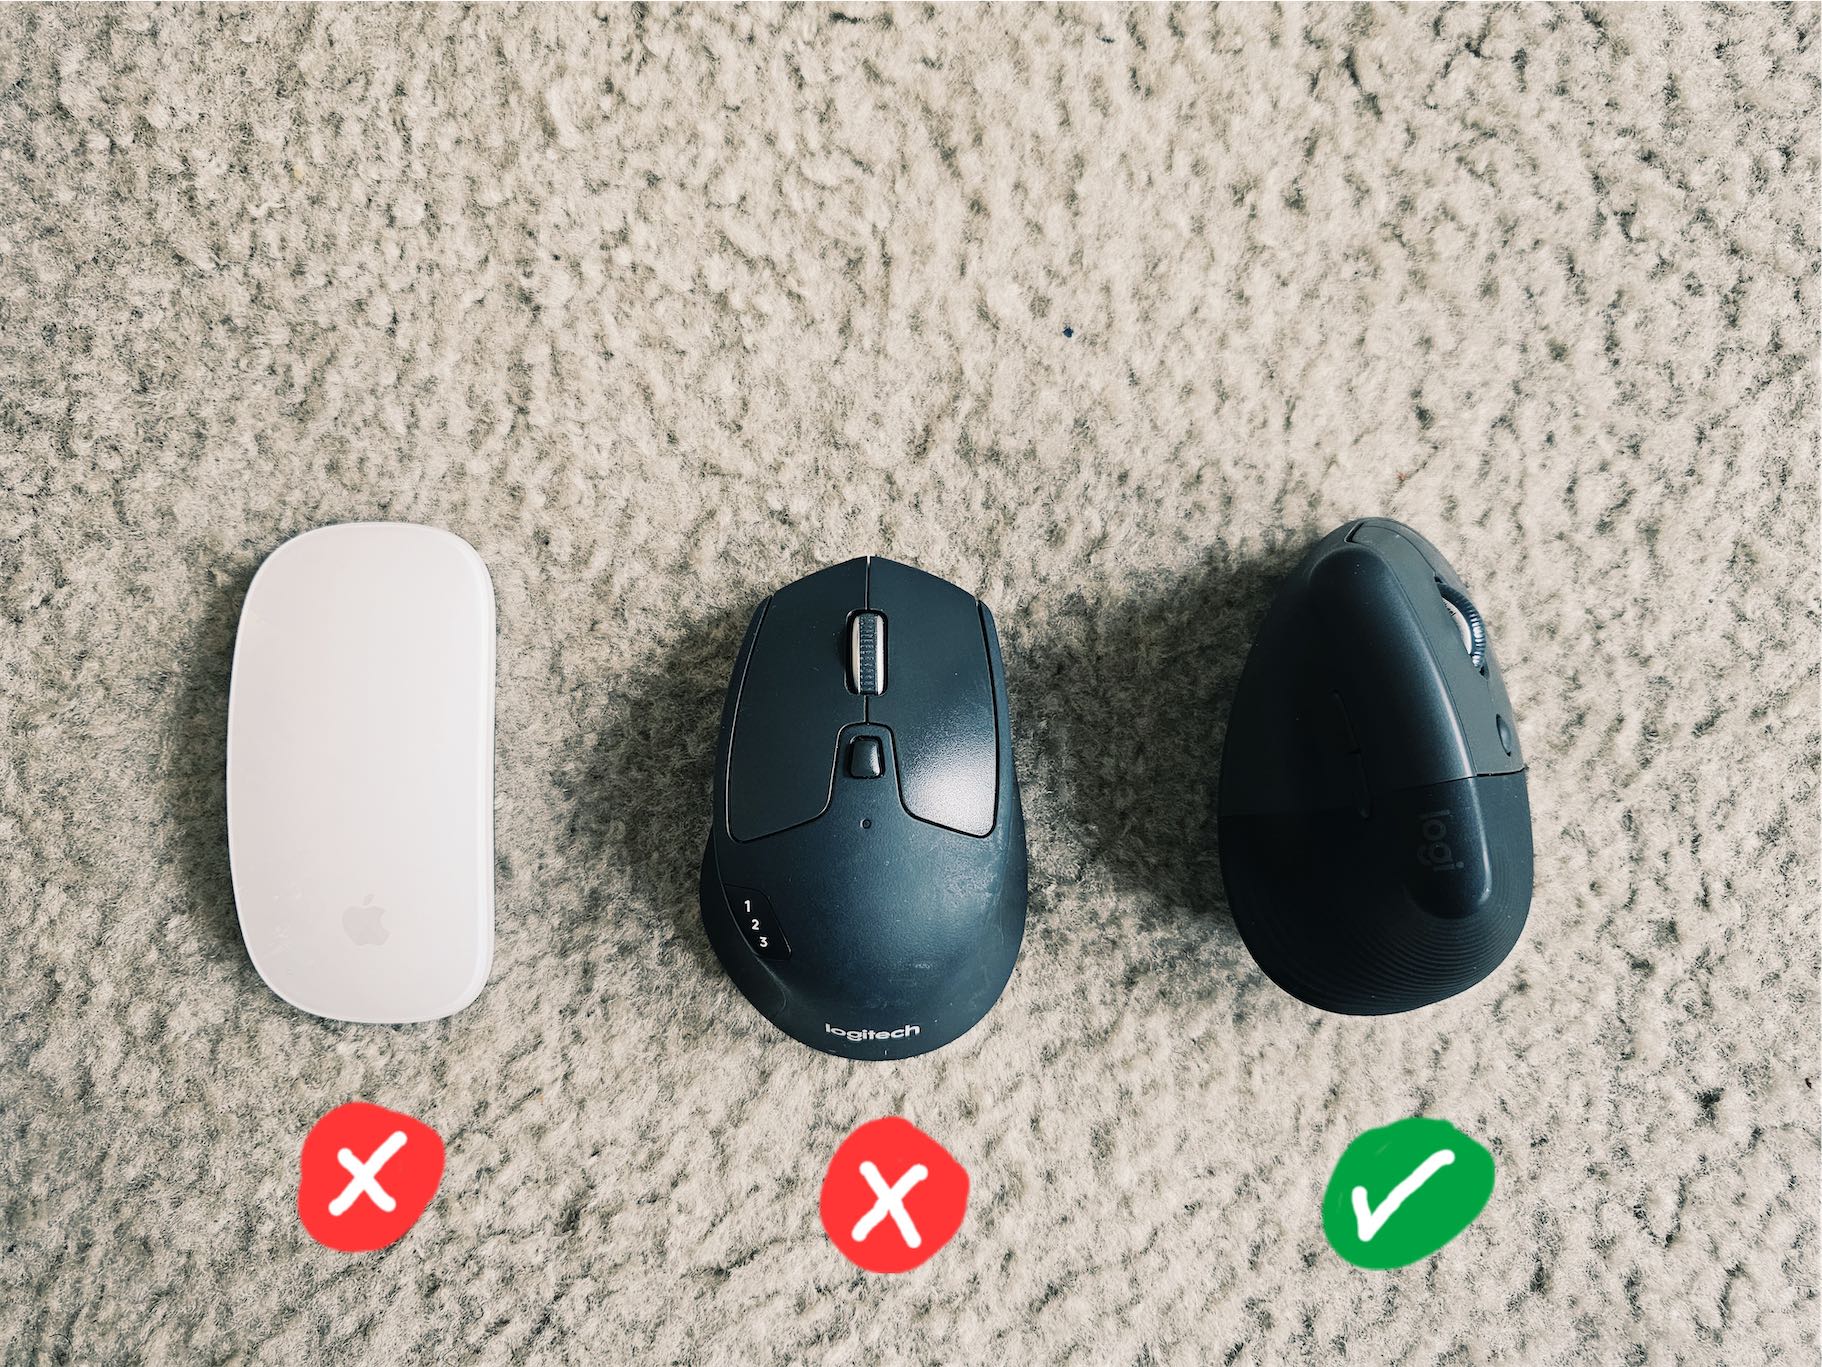 Photo of the mice I've used. Annotated icons below the mice indicating the Logi Lift is the winner.